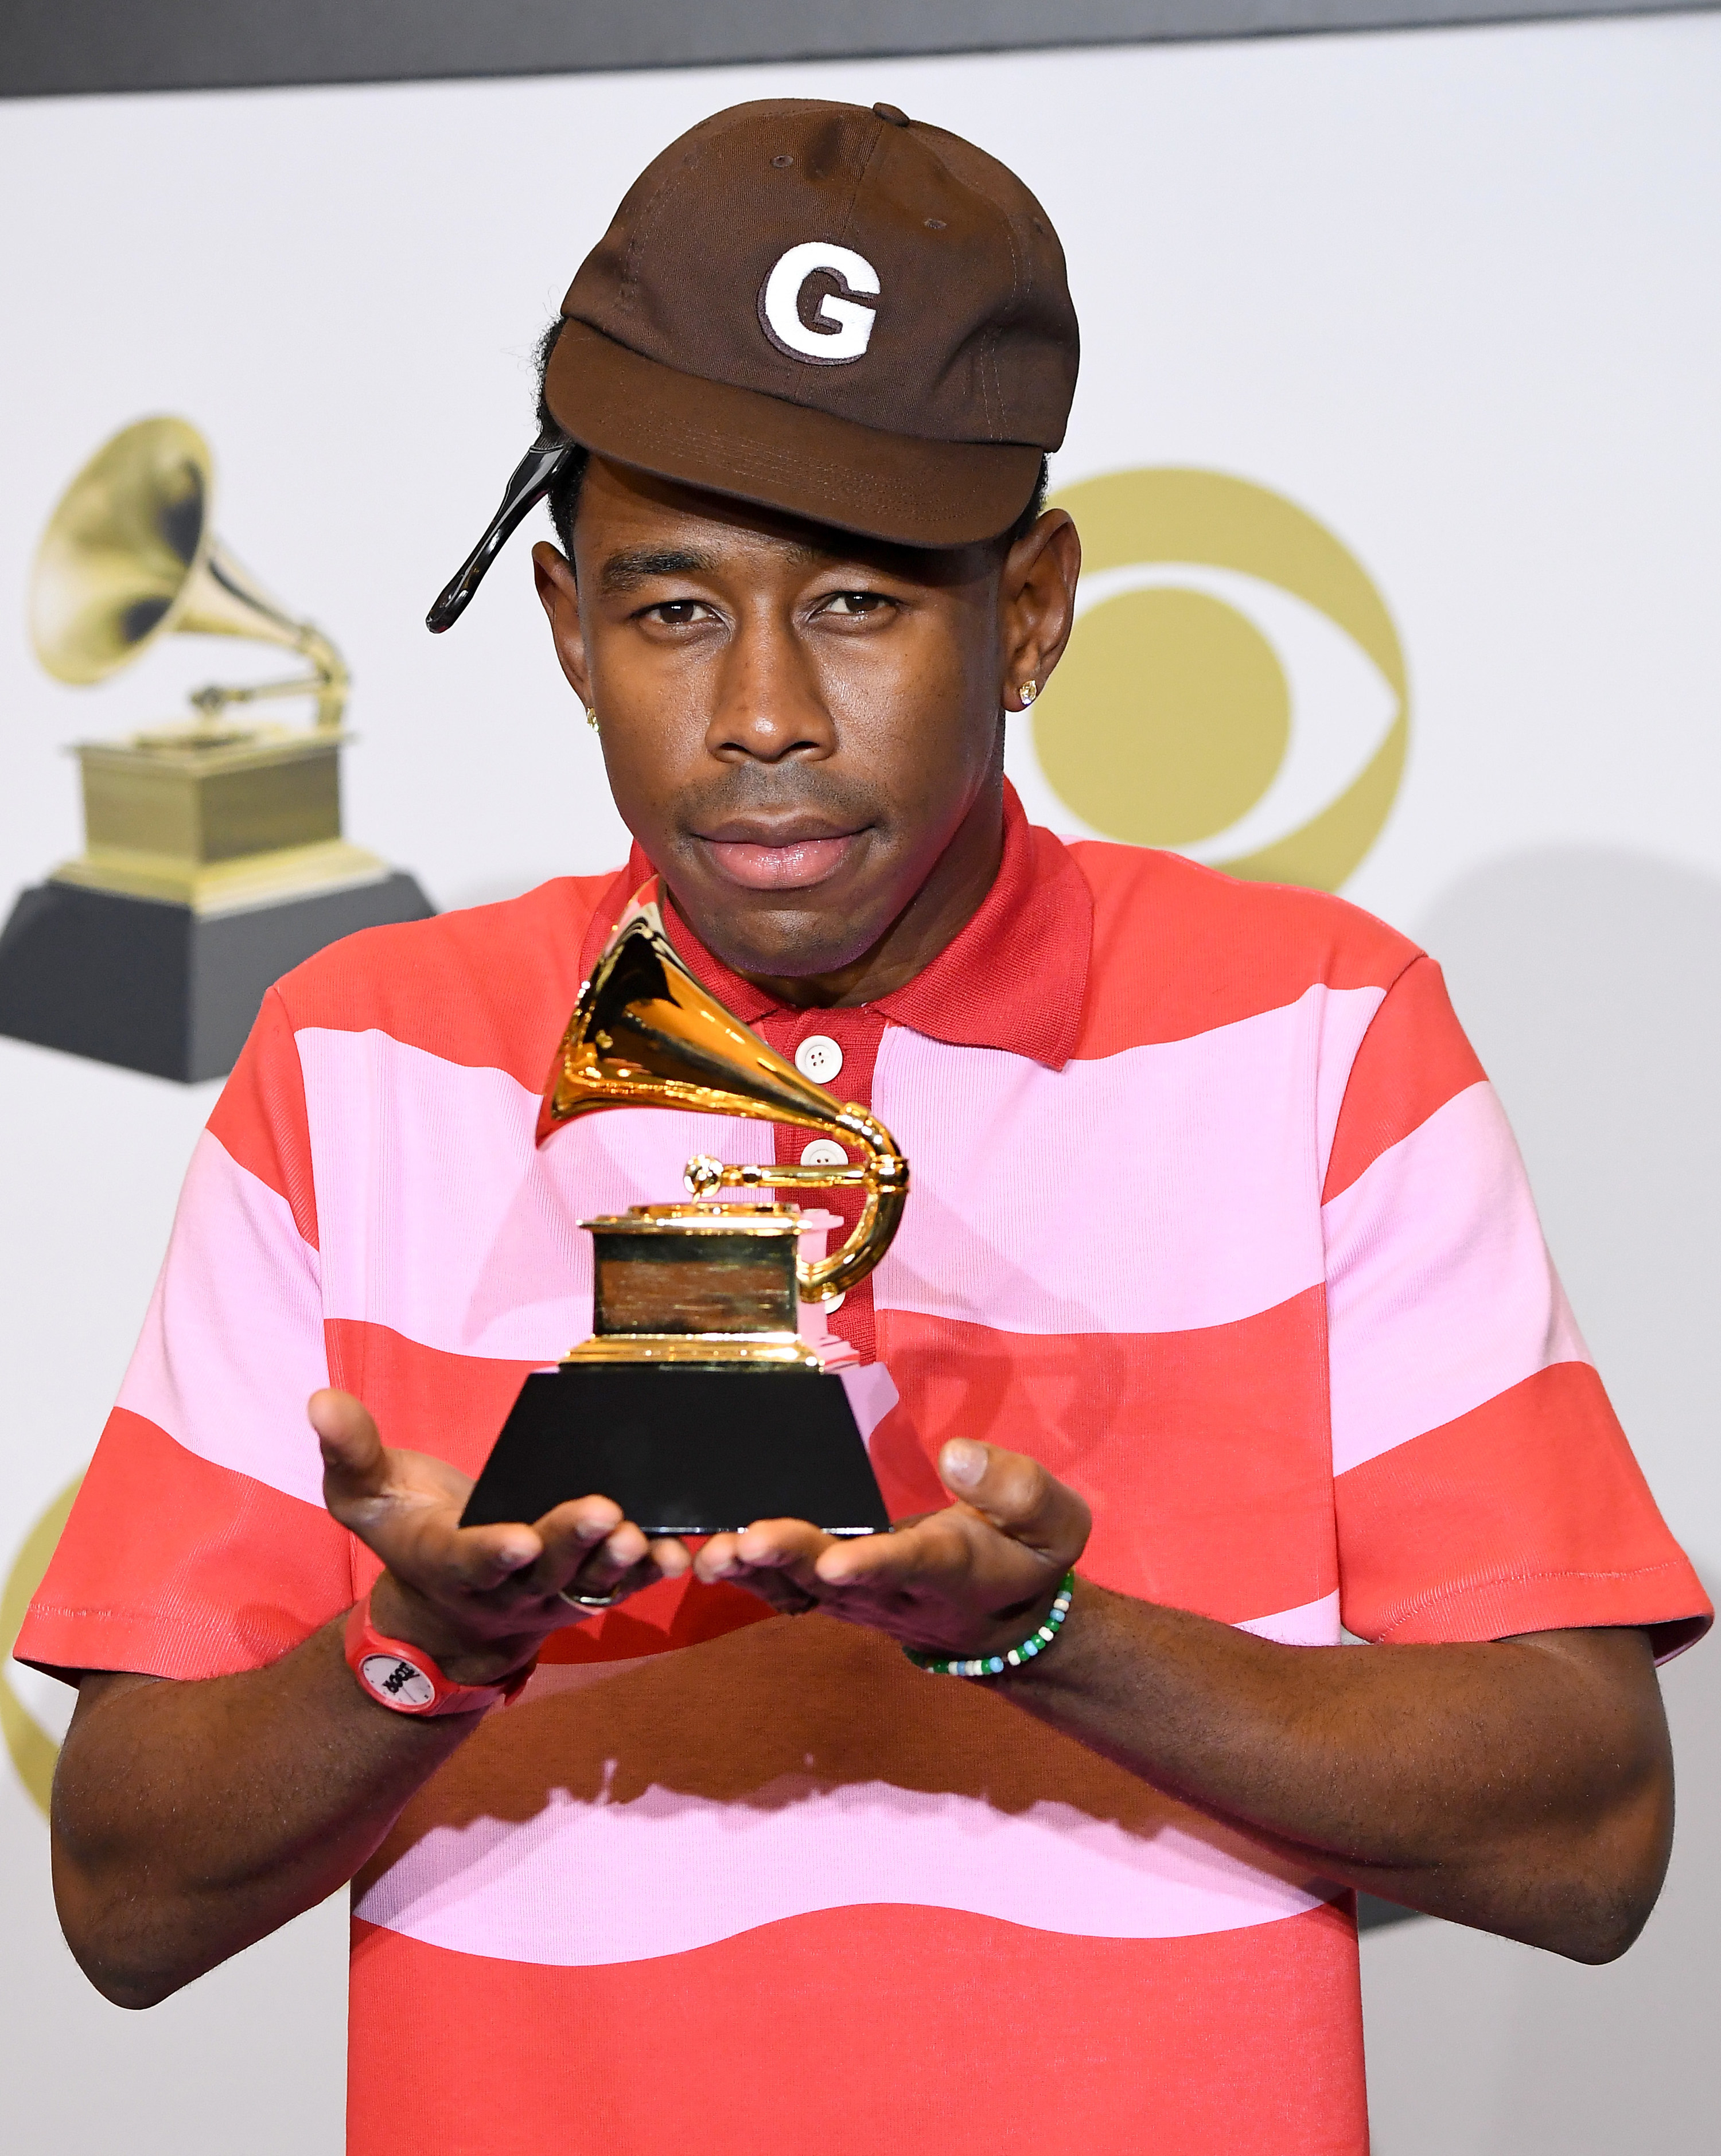 Recording Academy / GRAMMYs on Instagram: Tyler, The Creator is all packed  up and ready for the #GRAMMYs. 🙌